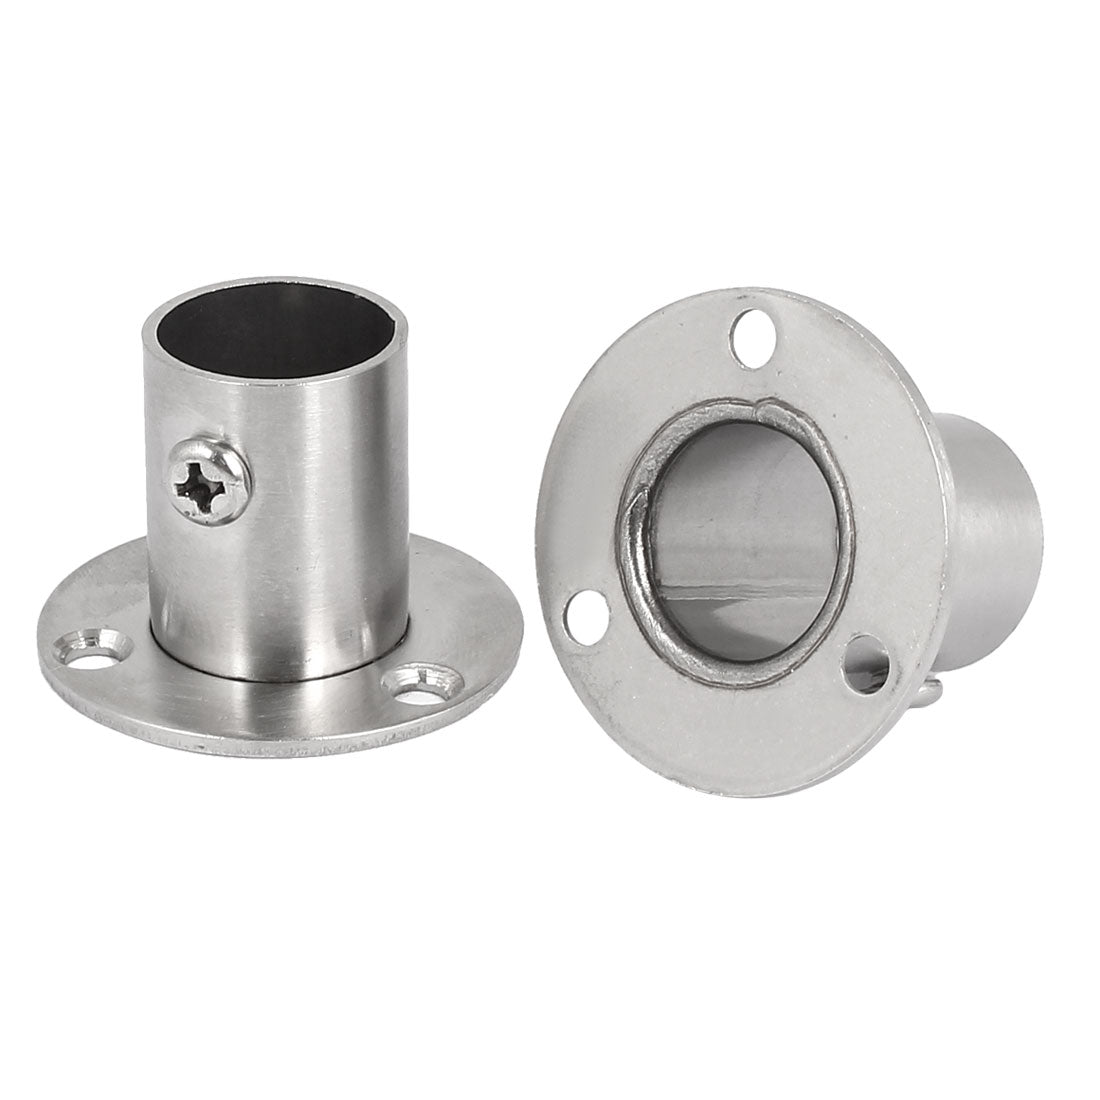 uxcell Uxcell Bedroom Stainless Steel Flange Socket Wardrobe Rail End Support Bracket 2pcs